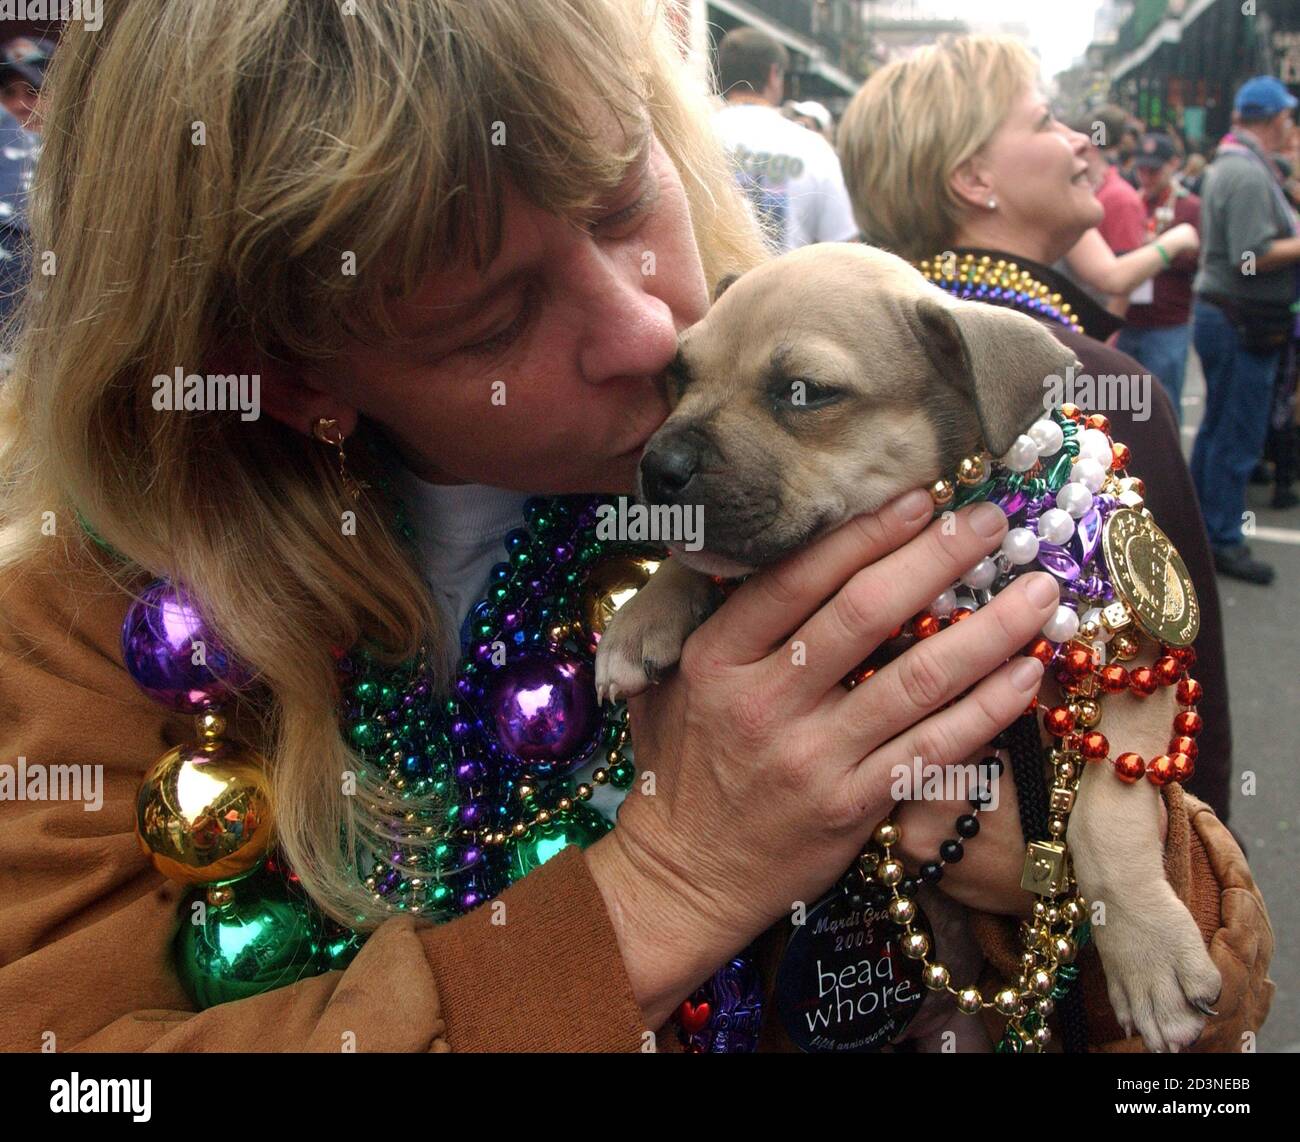 Karen Spear of West Palm Beach, Florida kisses her dog Grazer, a seven week-old Pitt Bull, on Bourbon Street in New Orleans during Mardi Gras, Febraury 7, 2005. It is Spear's third trip to Mardi Gras. The Carnival season culminates on Fat Tuesday, or Mardi Gras, on February 8. REUTERS/David Rae Morris  drm/GN Stock Photo